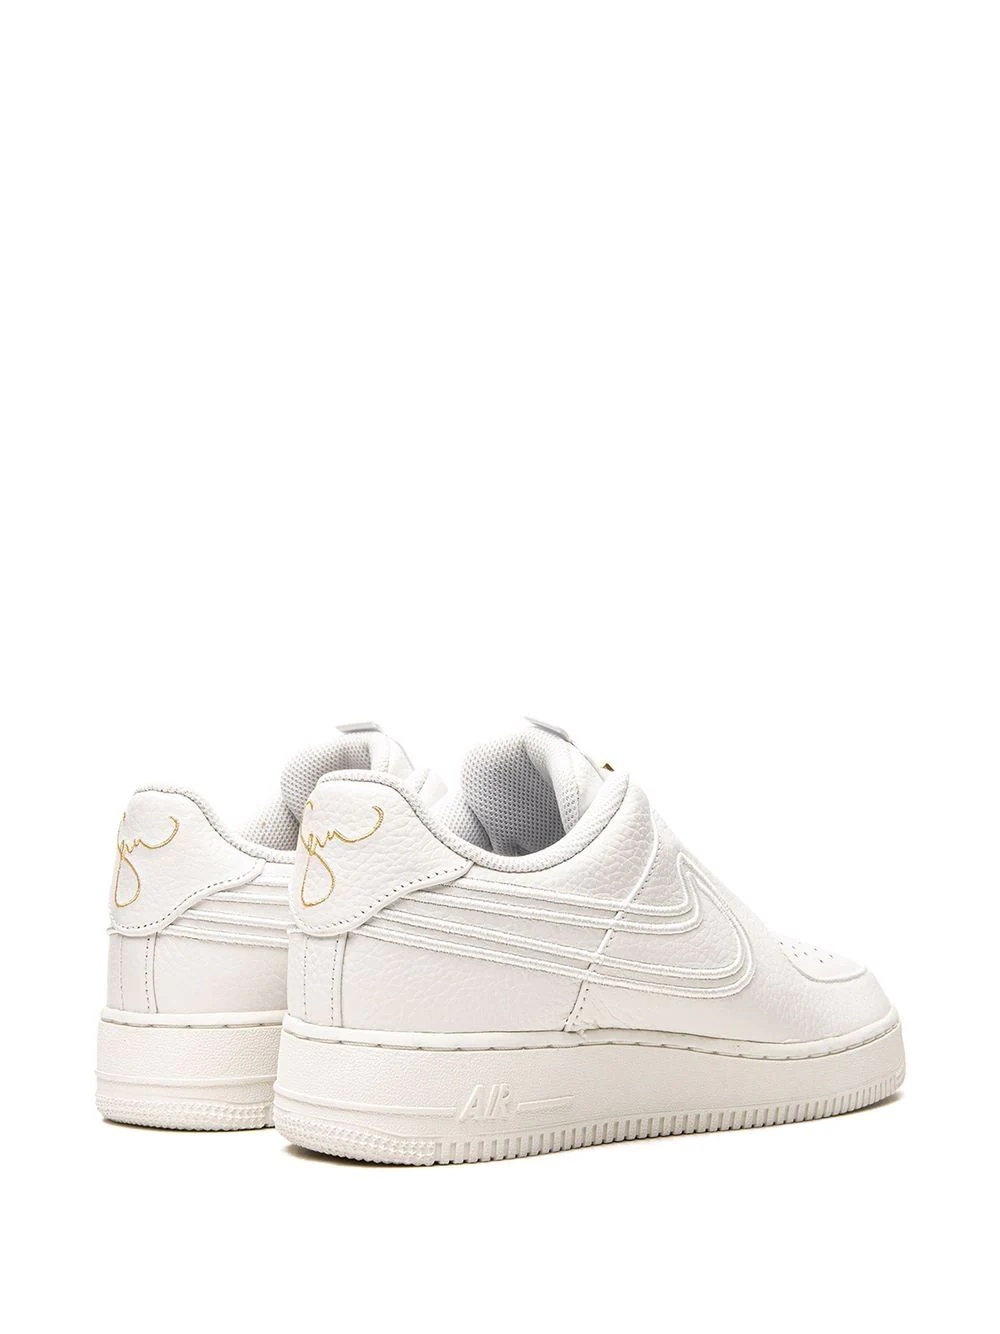 x Serena Williams Air Force 1 Low LXX sneakers - 3